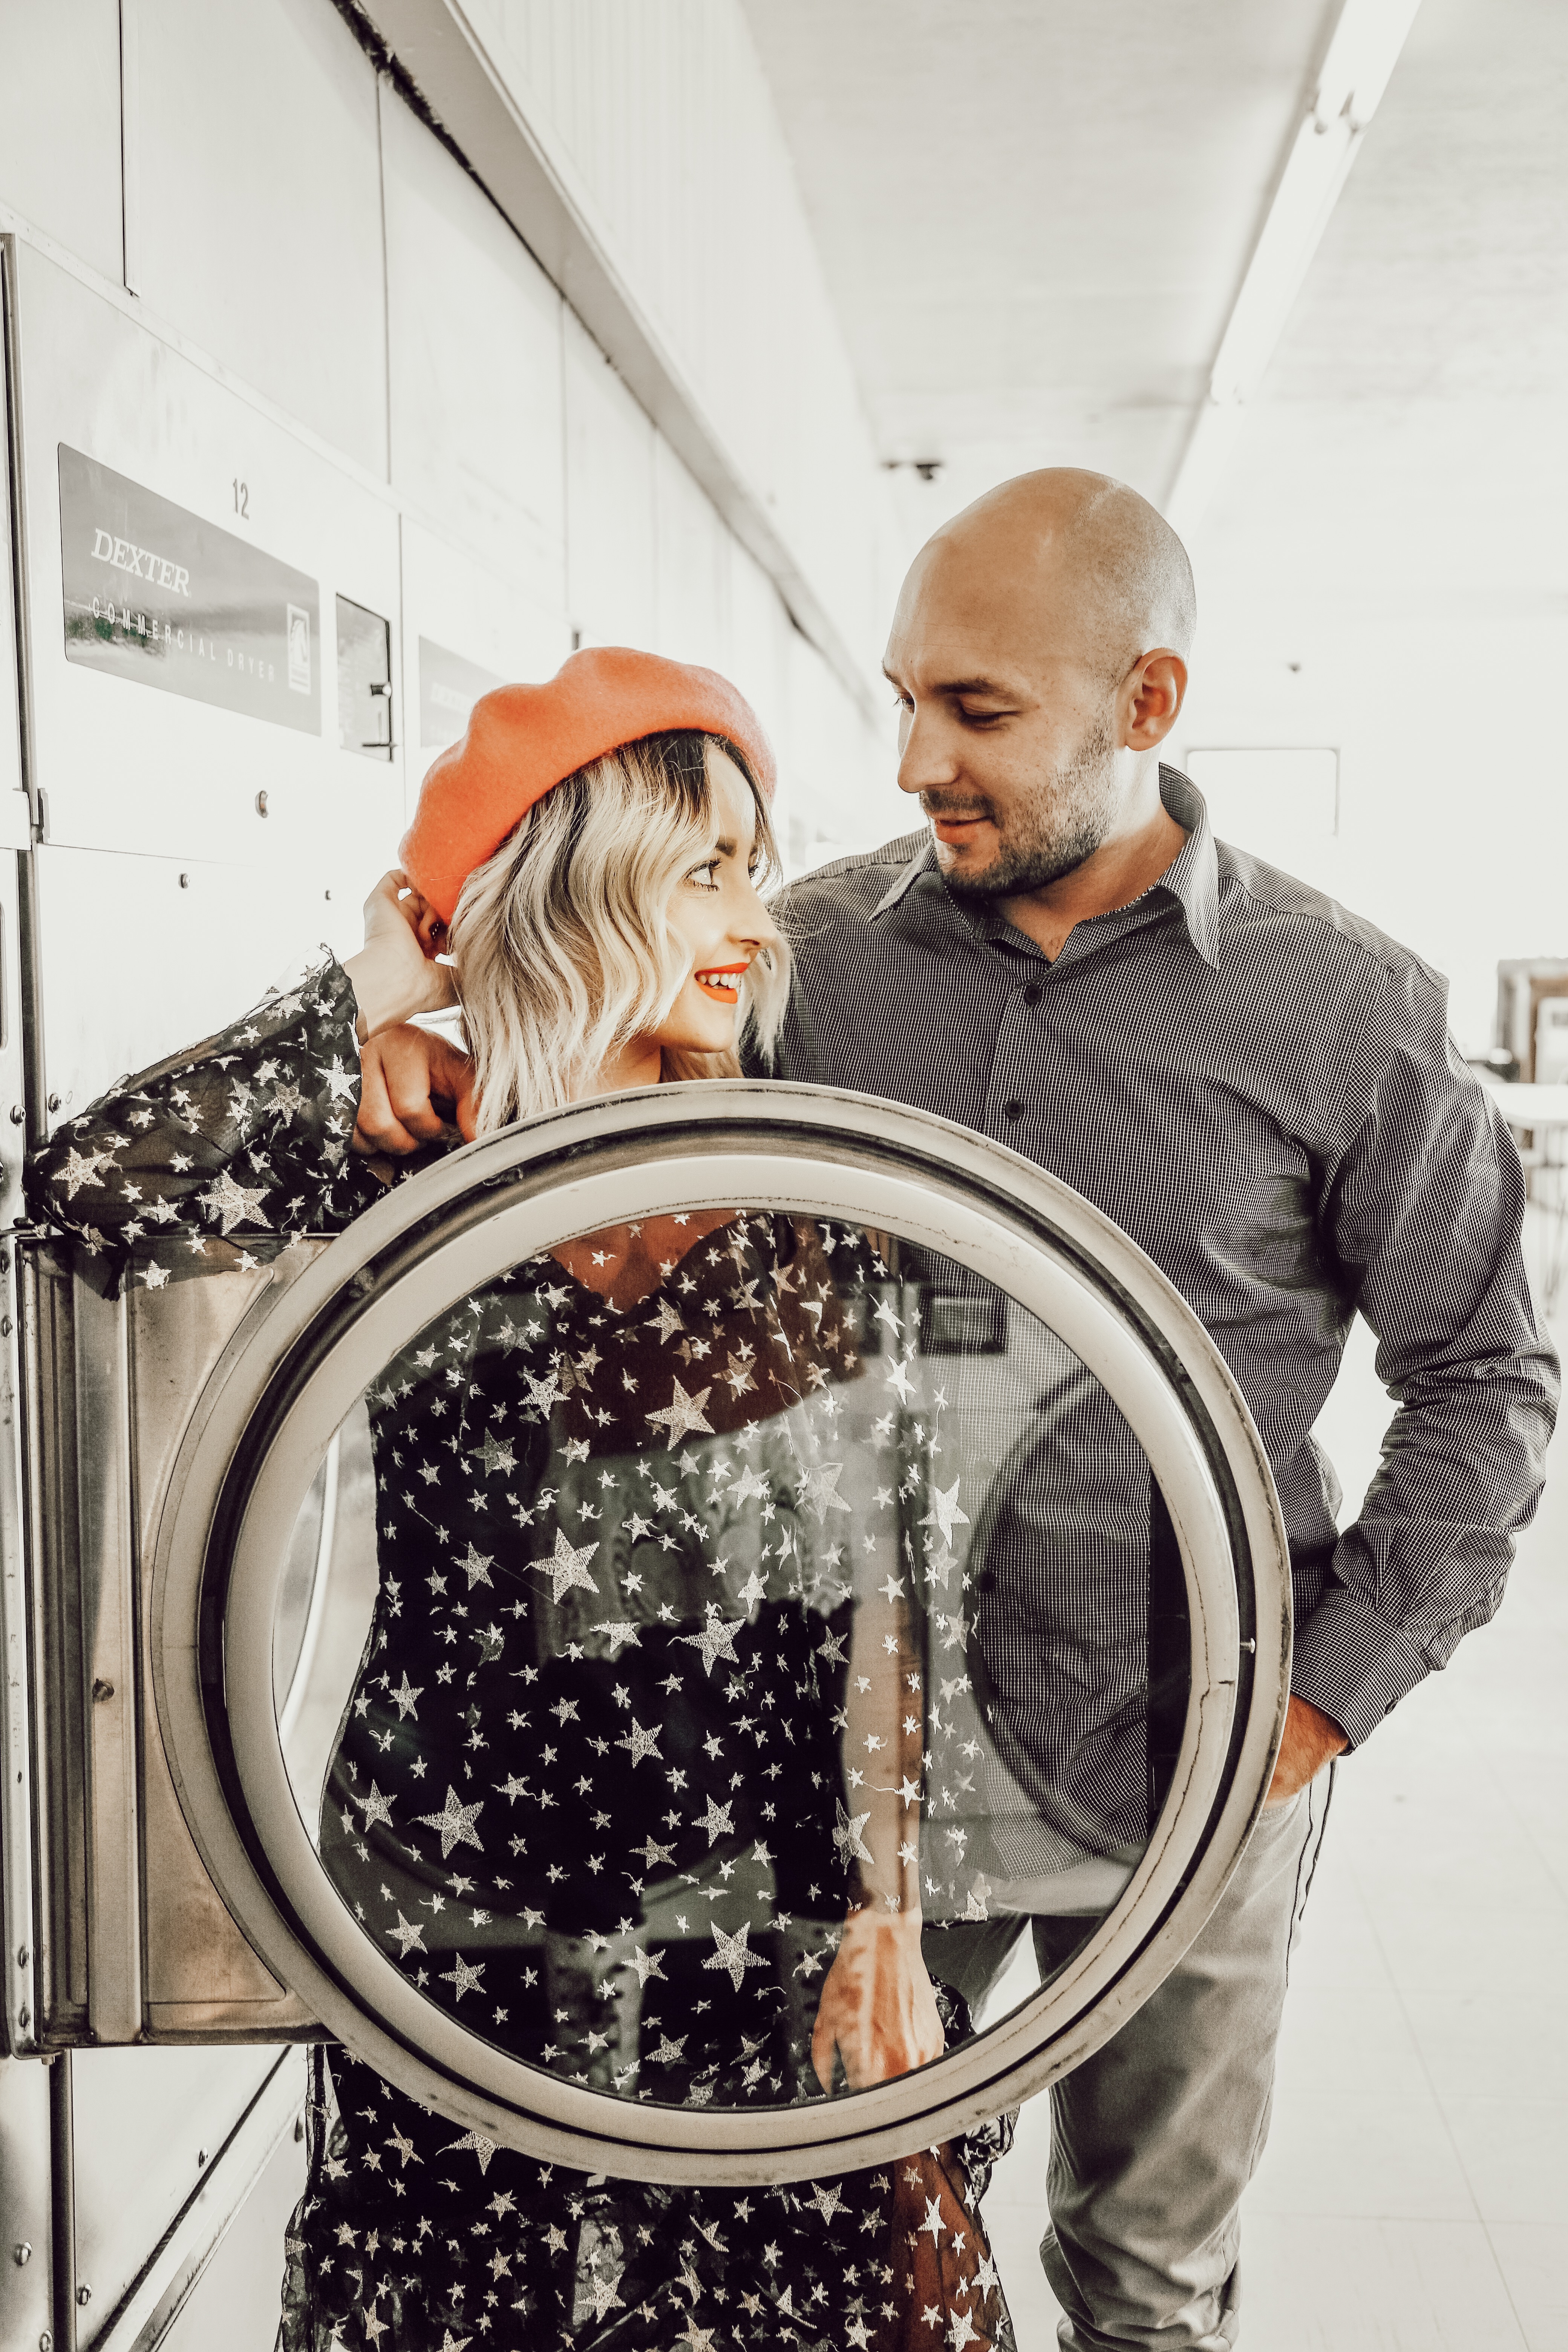 Alena Gidenko of modaprints.com shares her photoshoot with her hubby for Valentines Day at the Laundry Mat